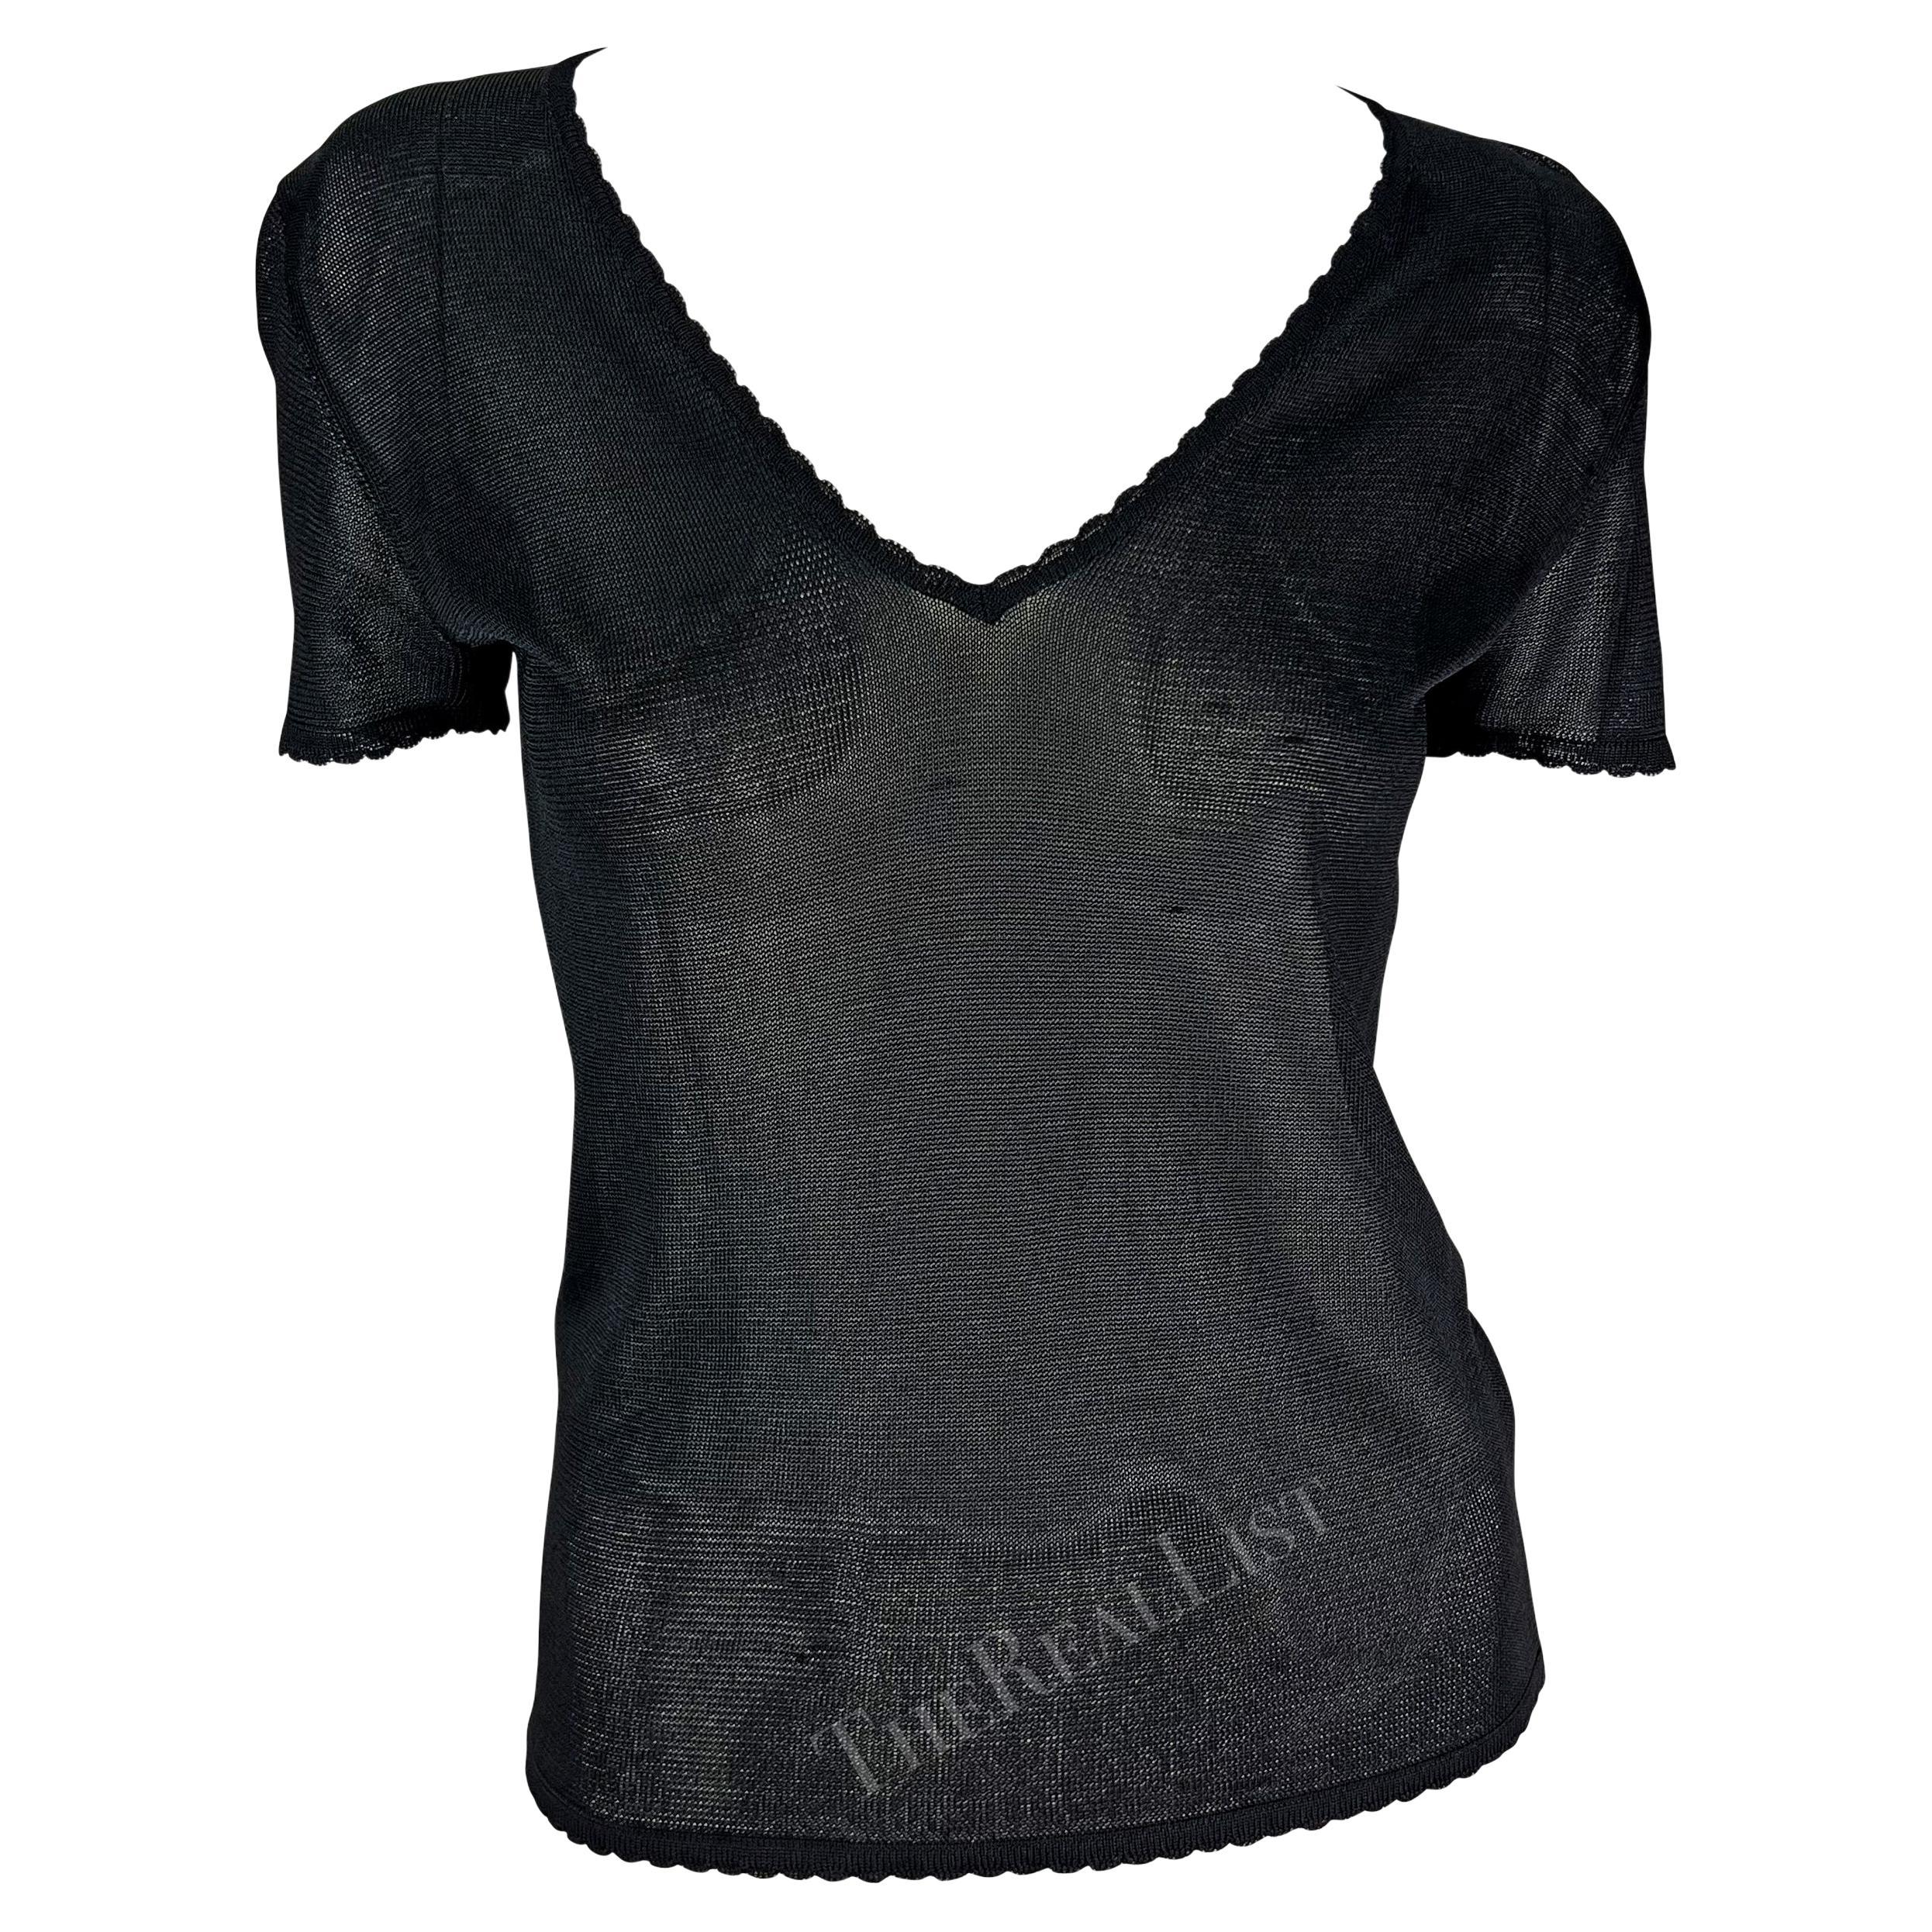 S/S 1997 Gianni Versace Scallop Knit Sheer Viscose V-Neck Black Sweater Top For Sale